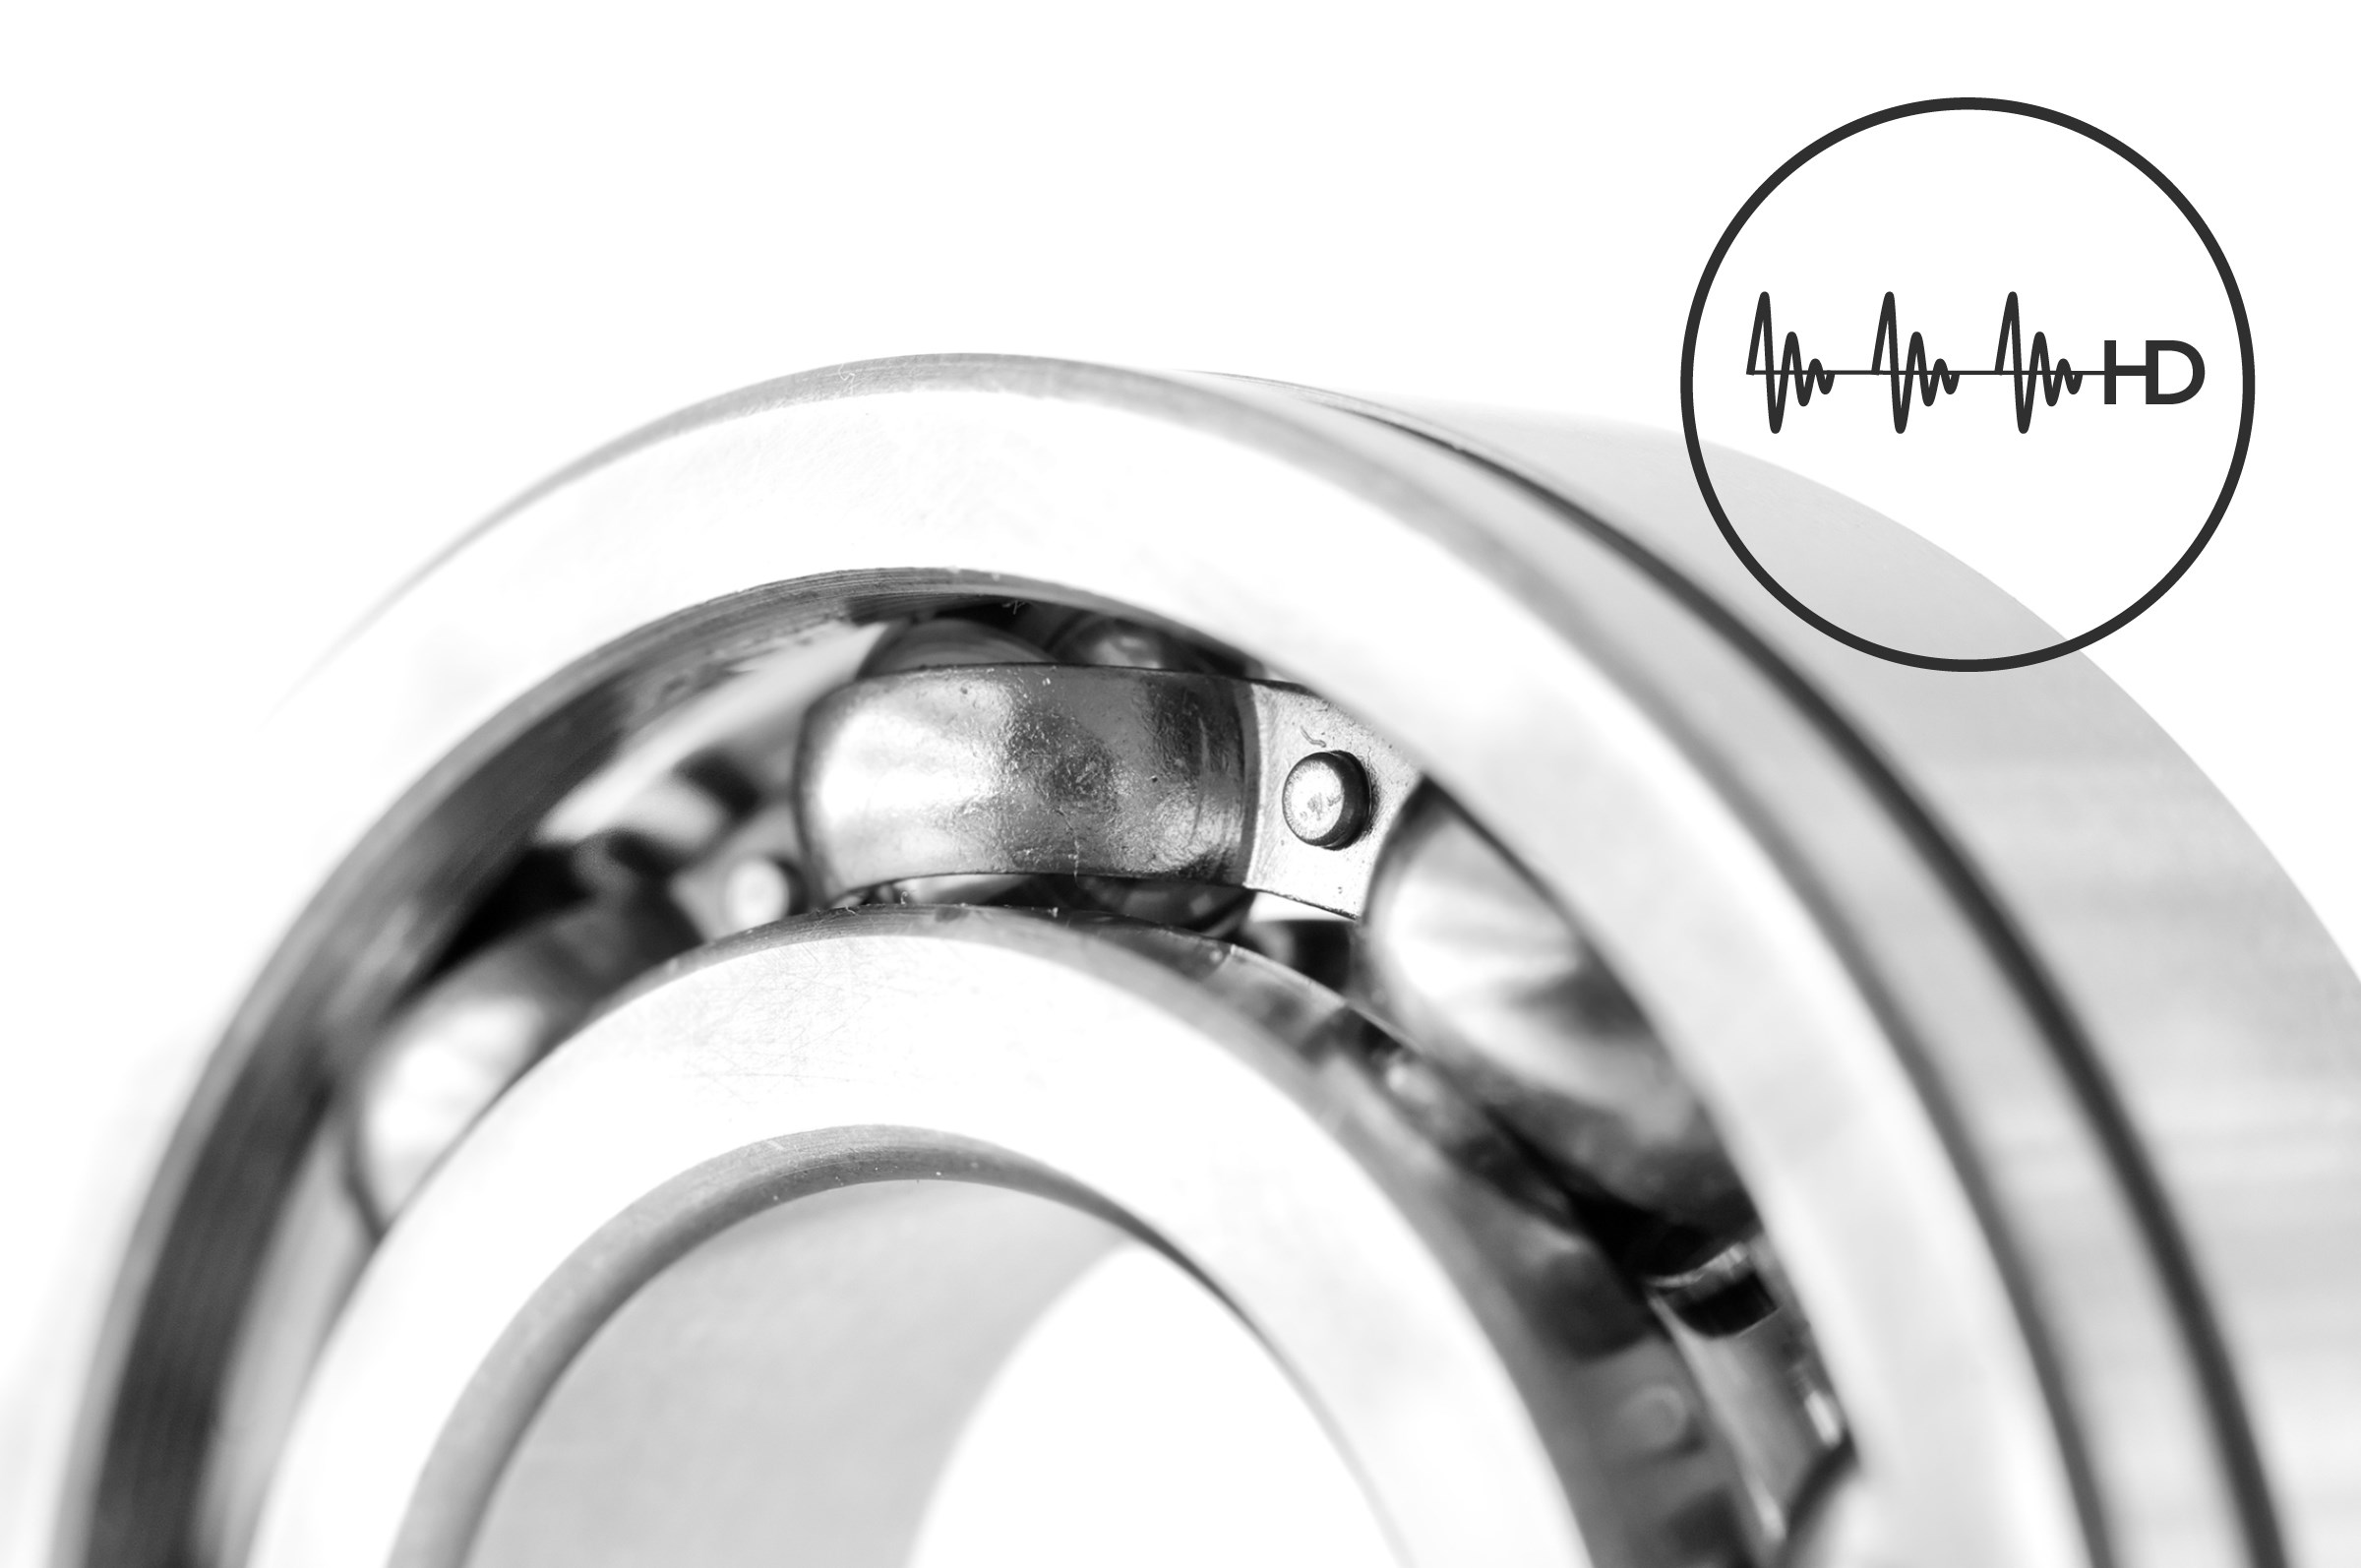 Close-up of ball bearings in gray and white with a small circular HD symbol to the right